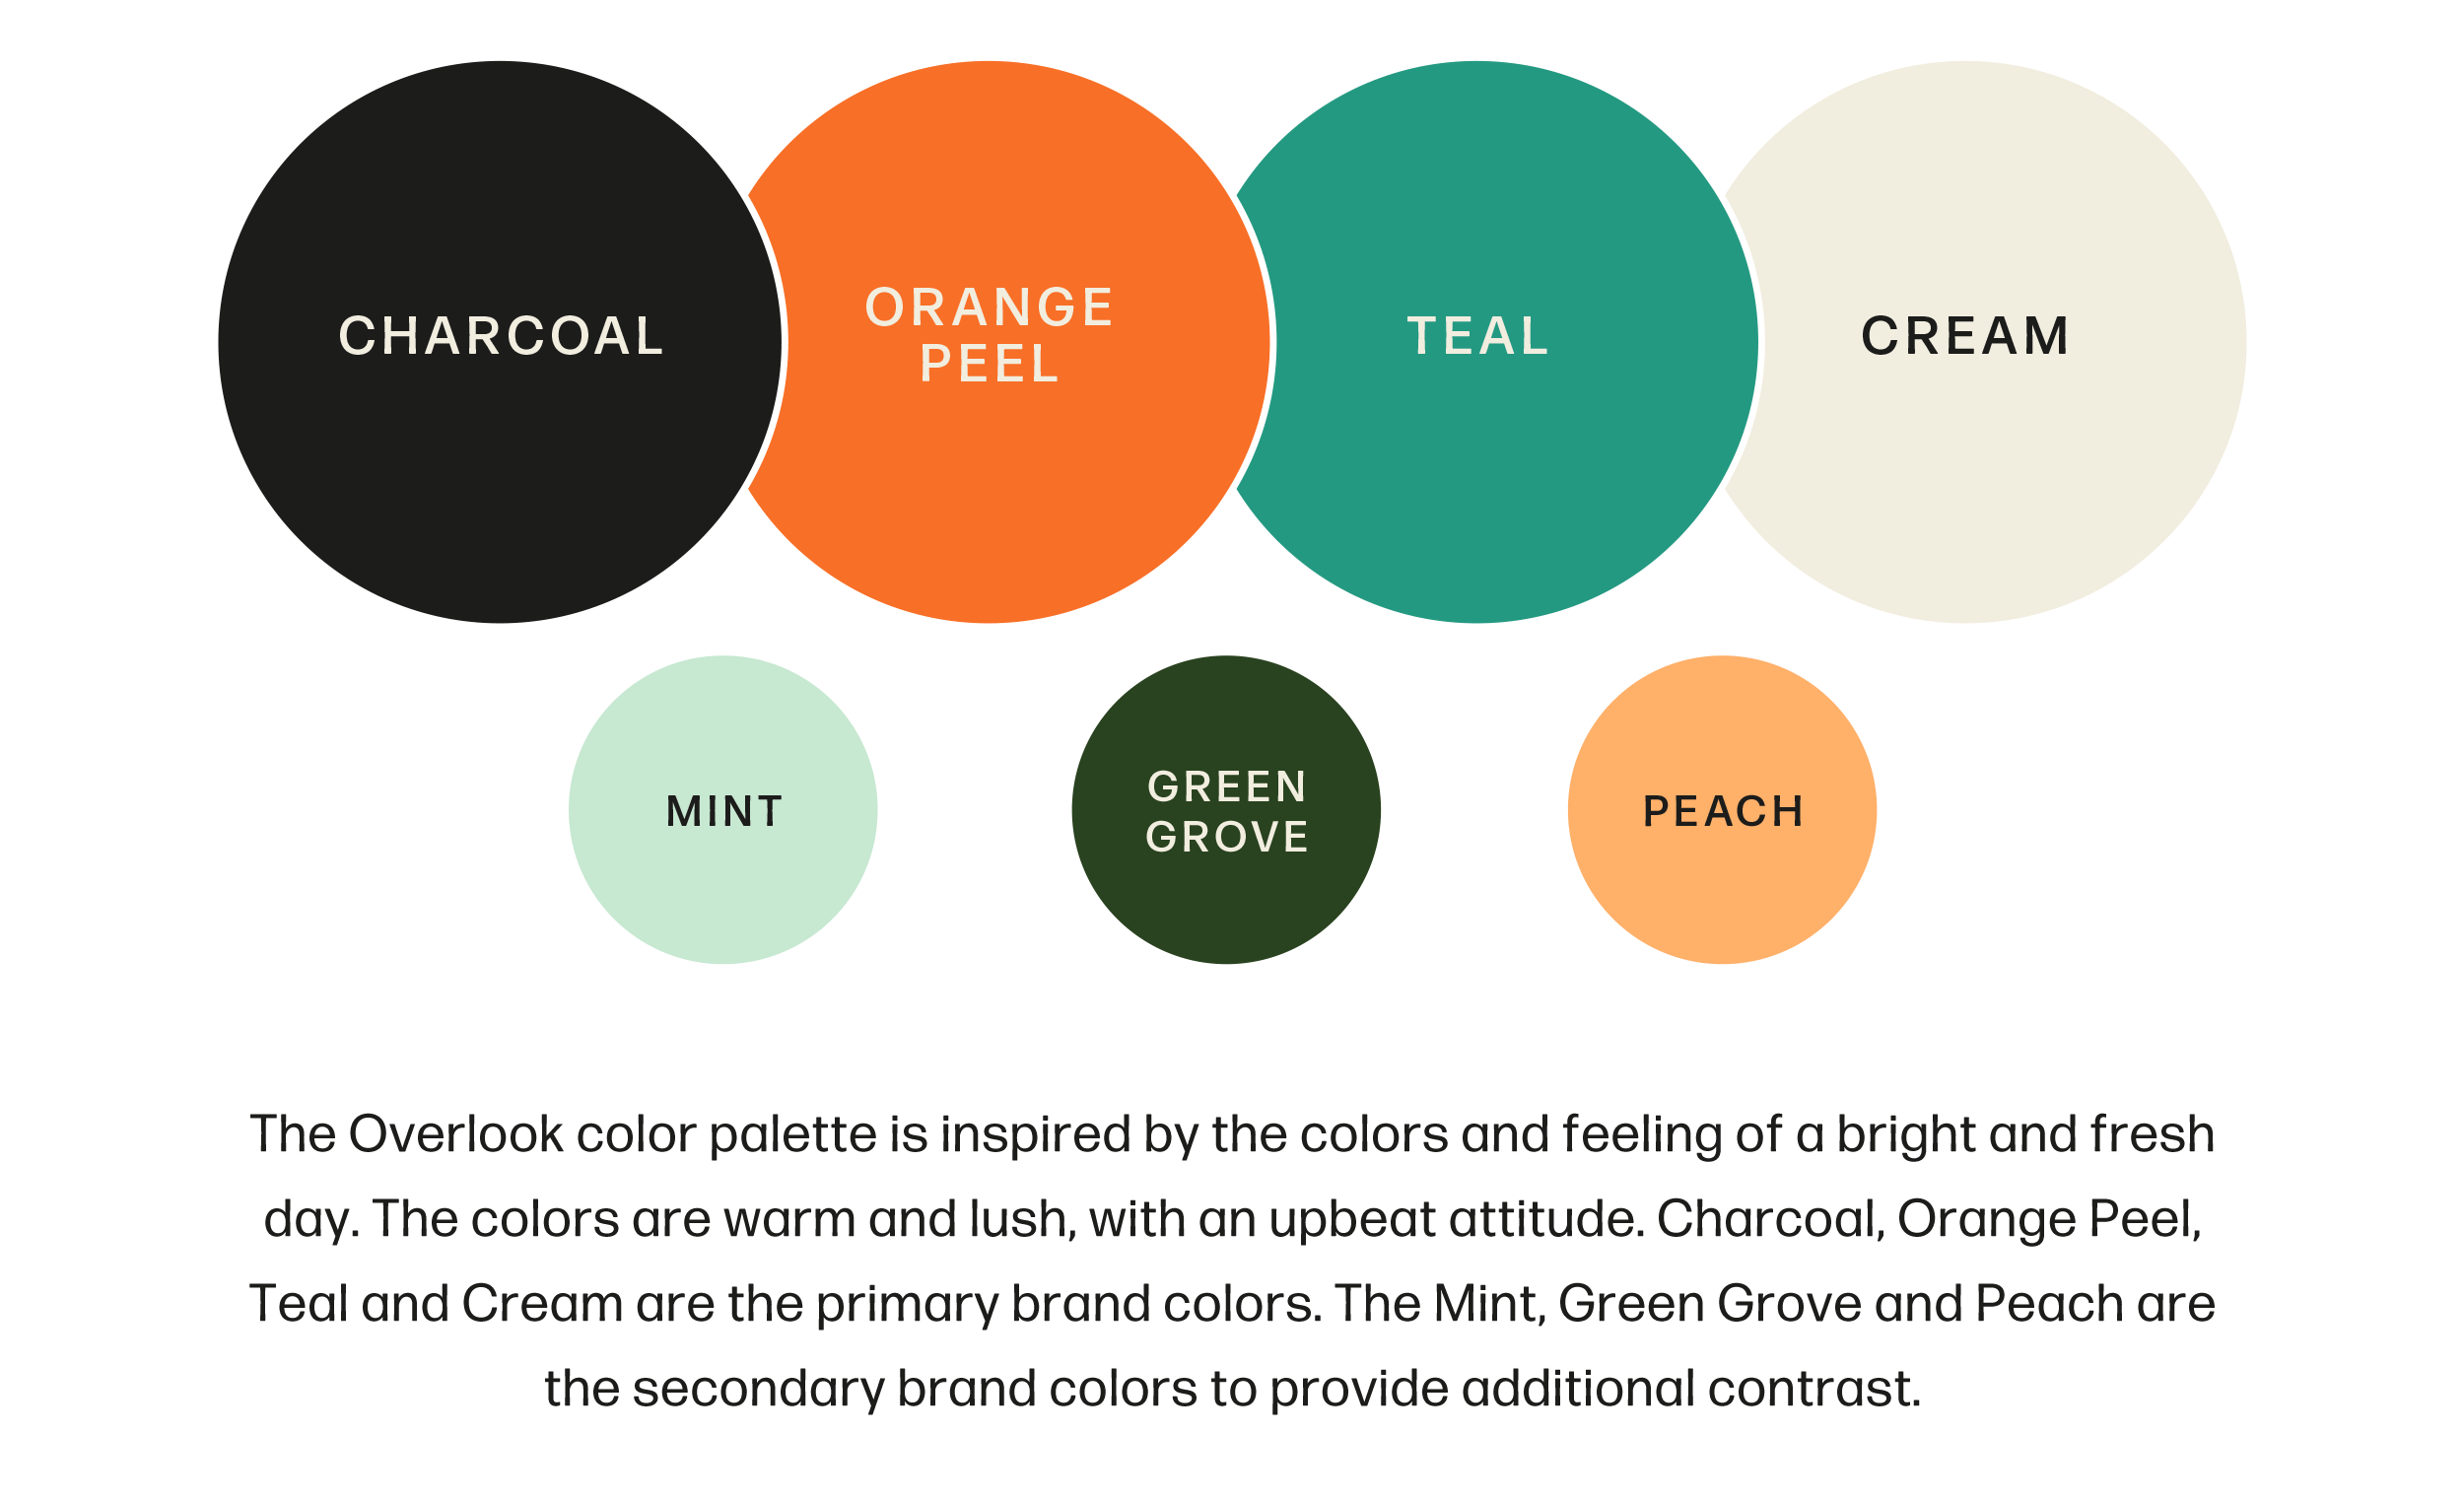 The Overlook color palette consisting of charcoal, orange peel, teal, cream, mint, green grove, and peach. The description reads: 